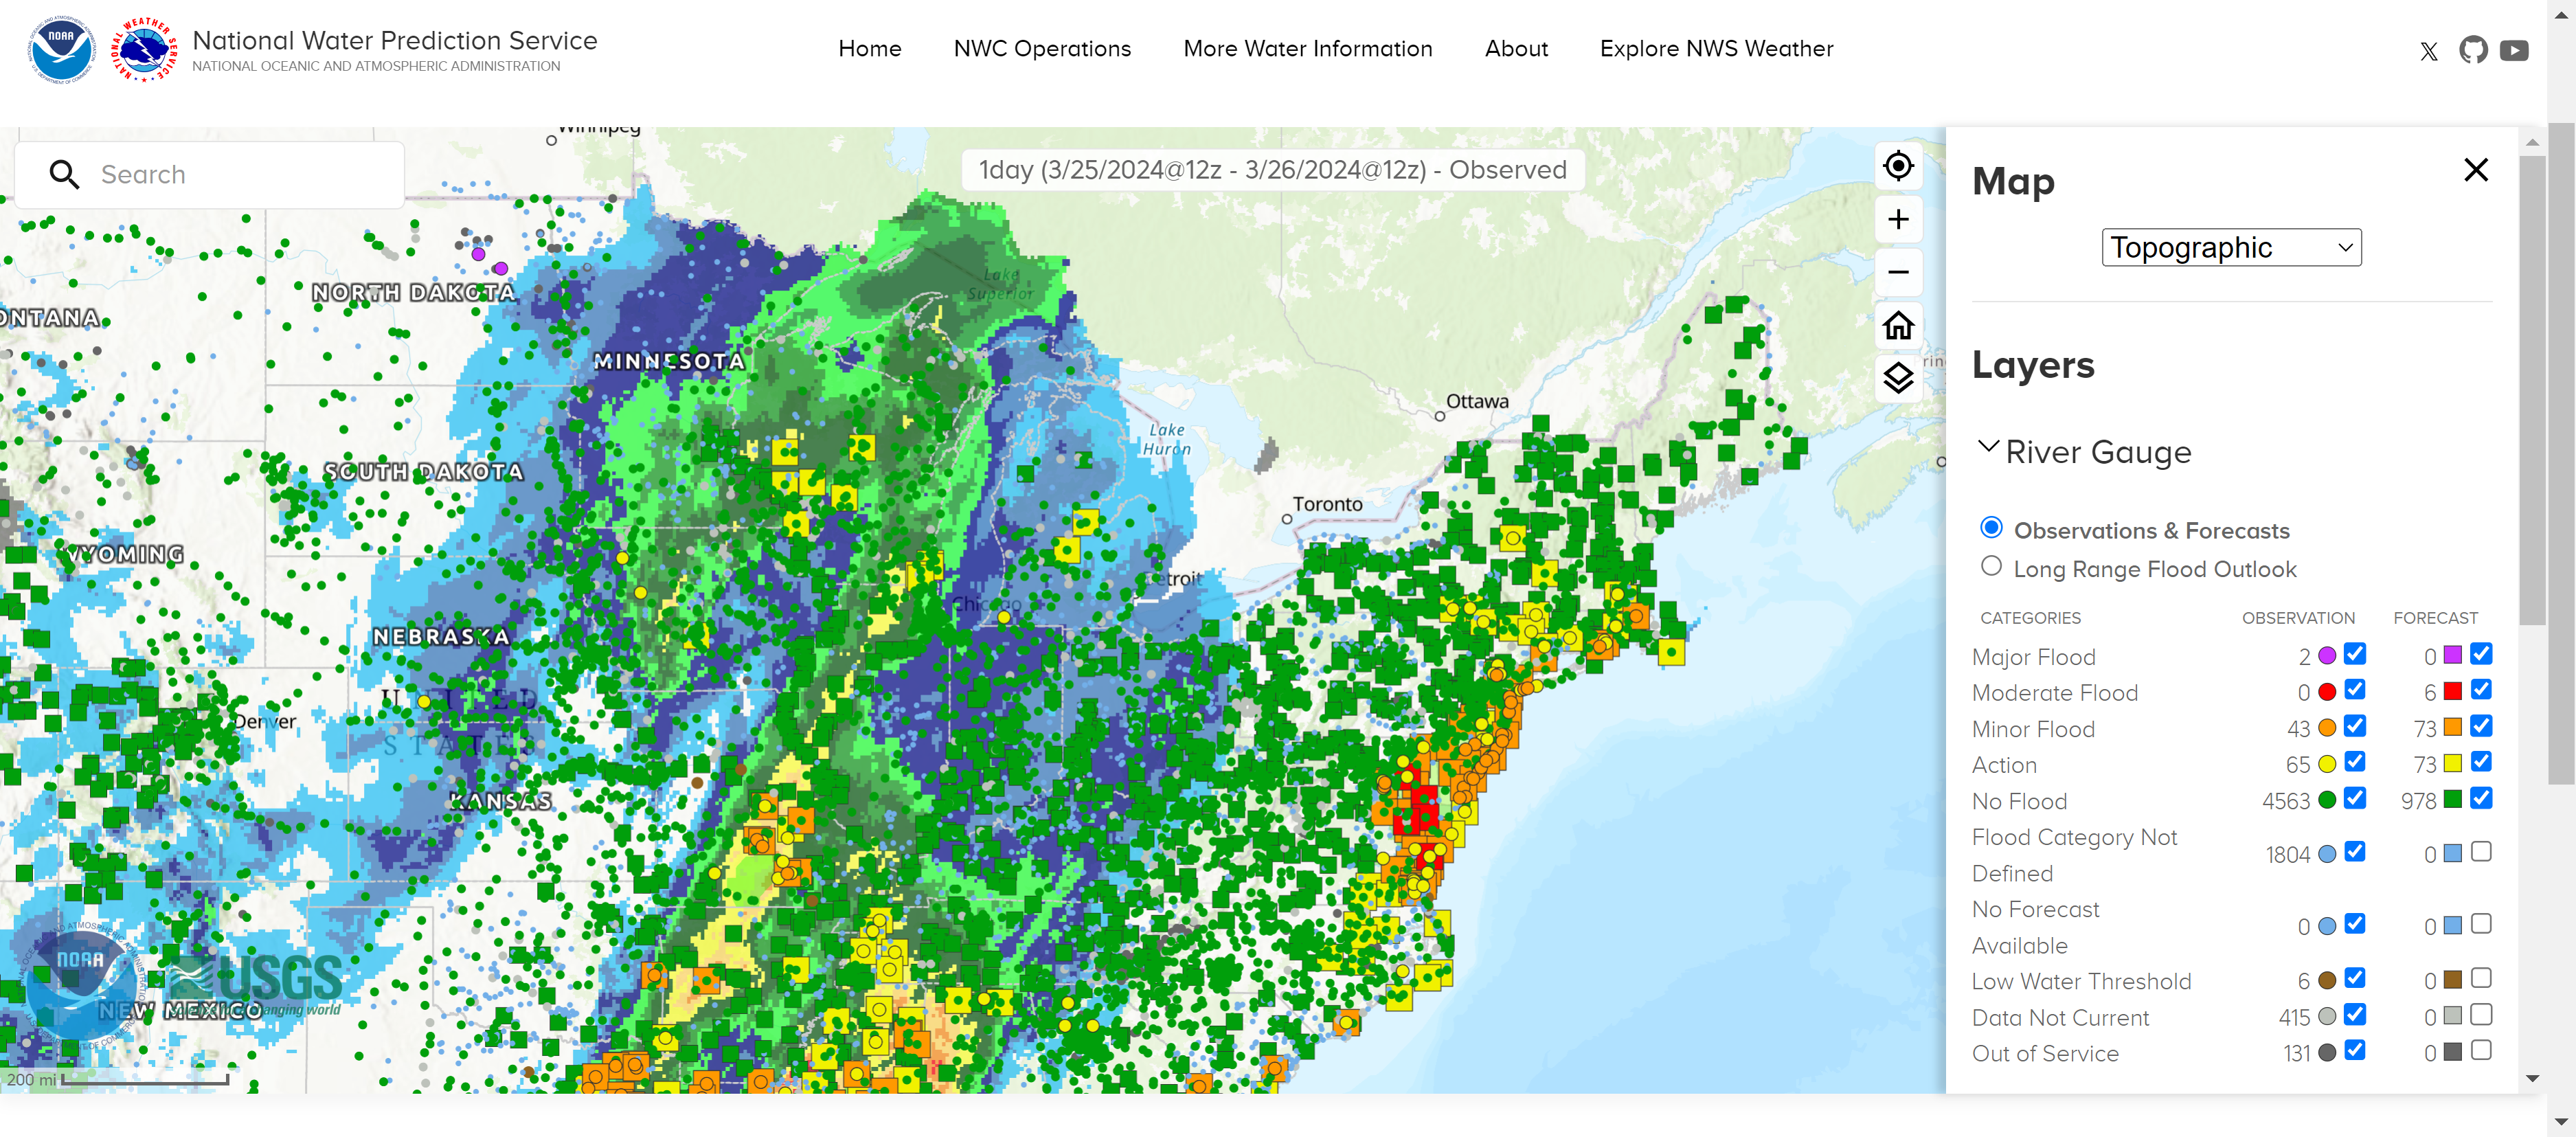 National Water Prediction Service (NWPS) map showing River Gauge observations and forecasts and associated precipitation estimates for March 26, 2024. This map should not be used for decision making.